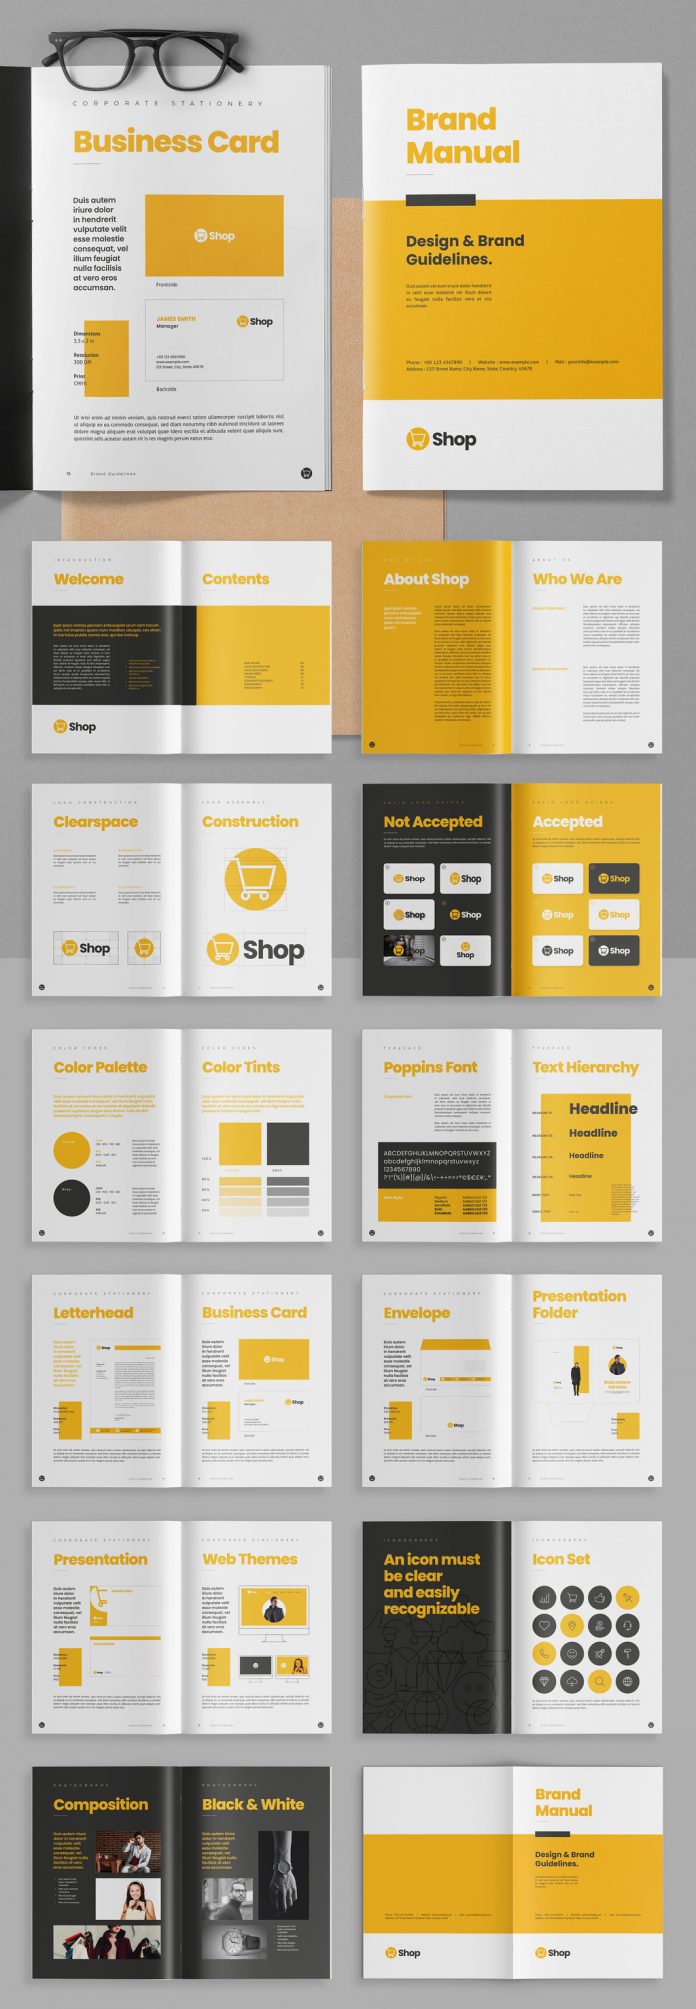 Brand Manual Template with Yellow Accents by Adobe Stock contributor bourjart.